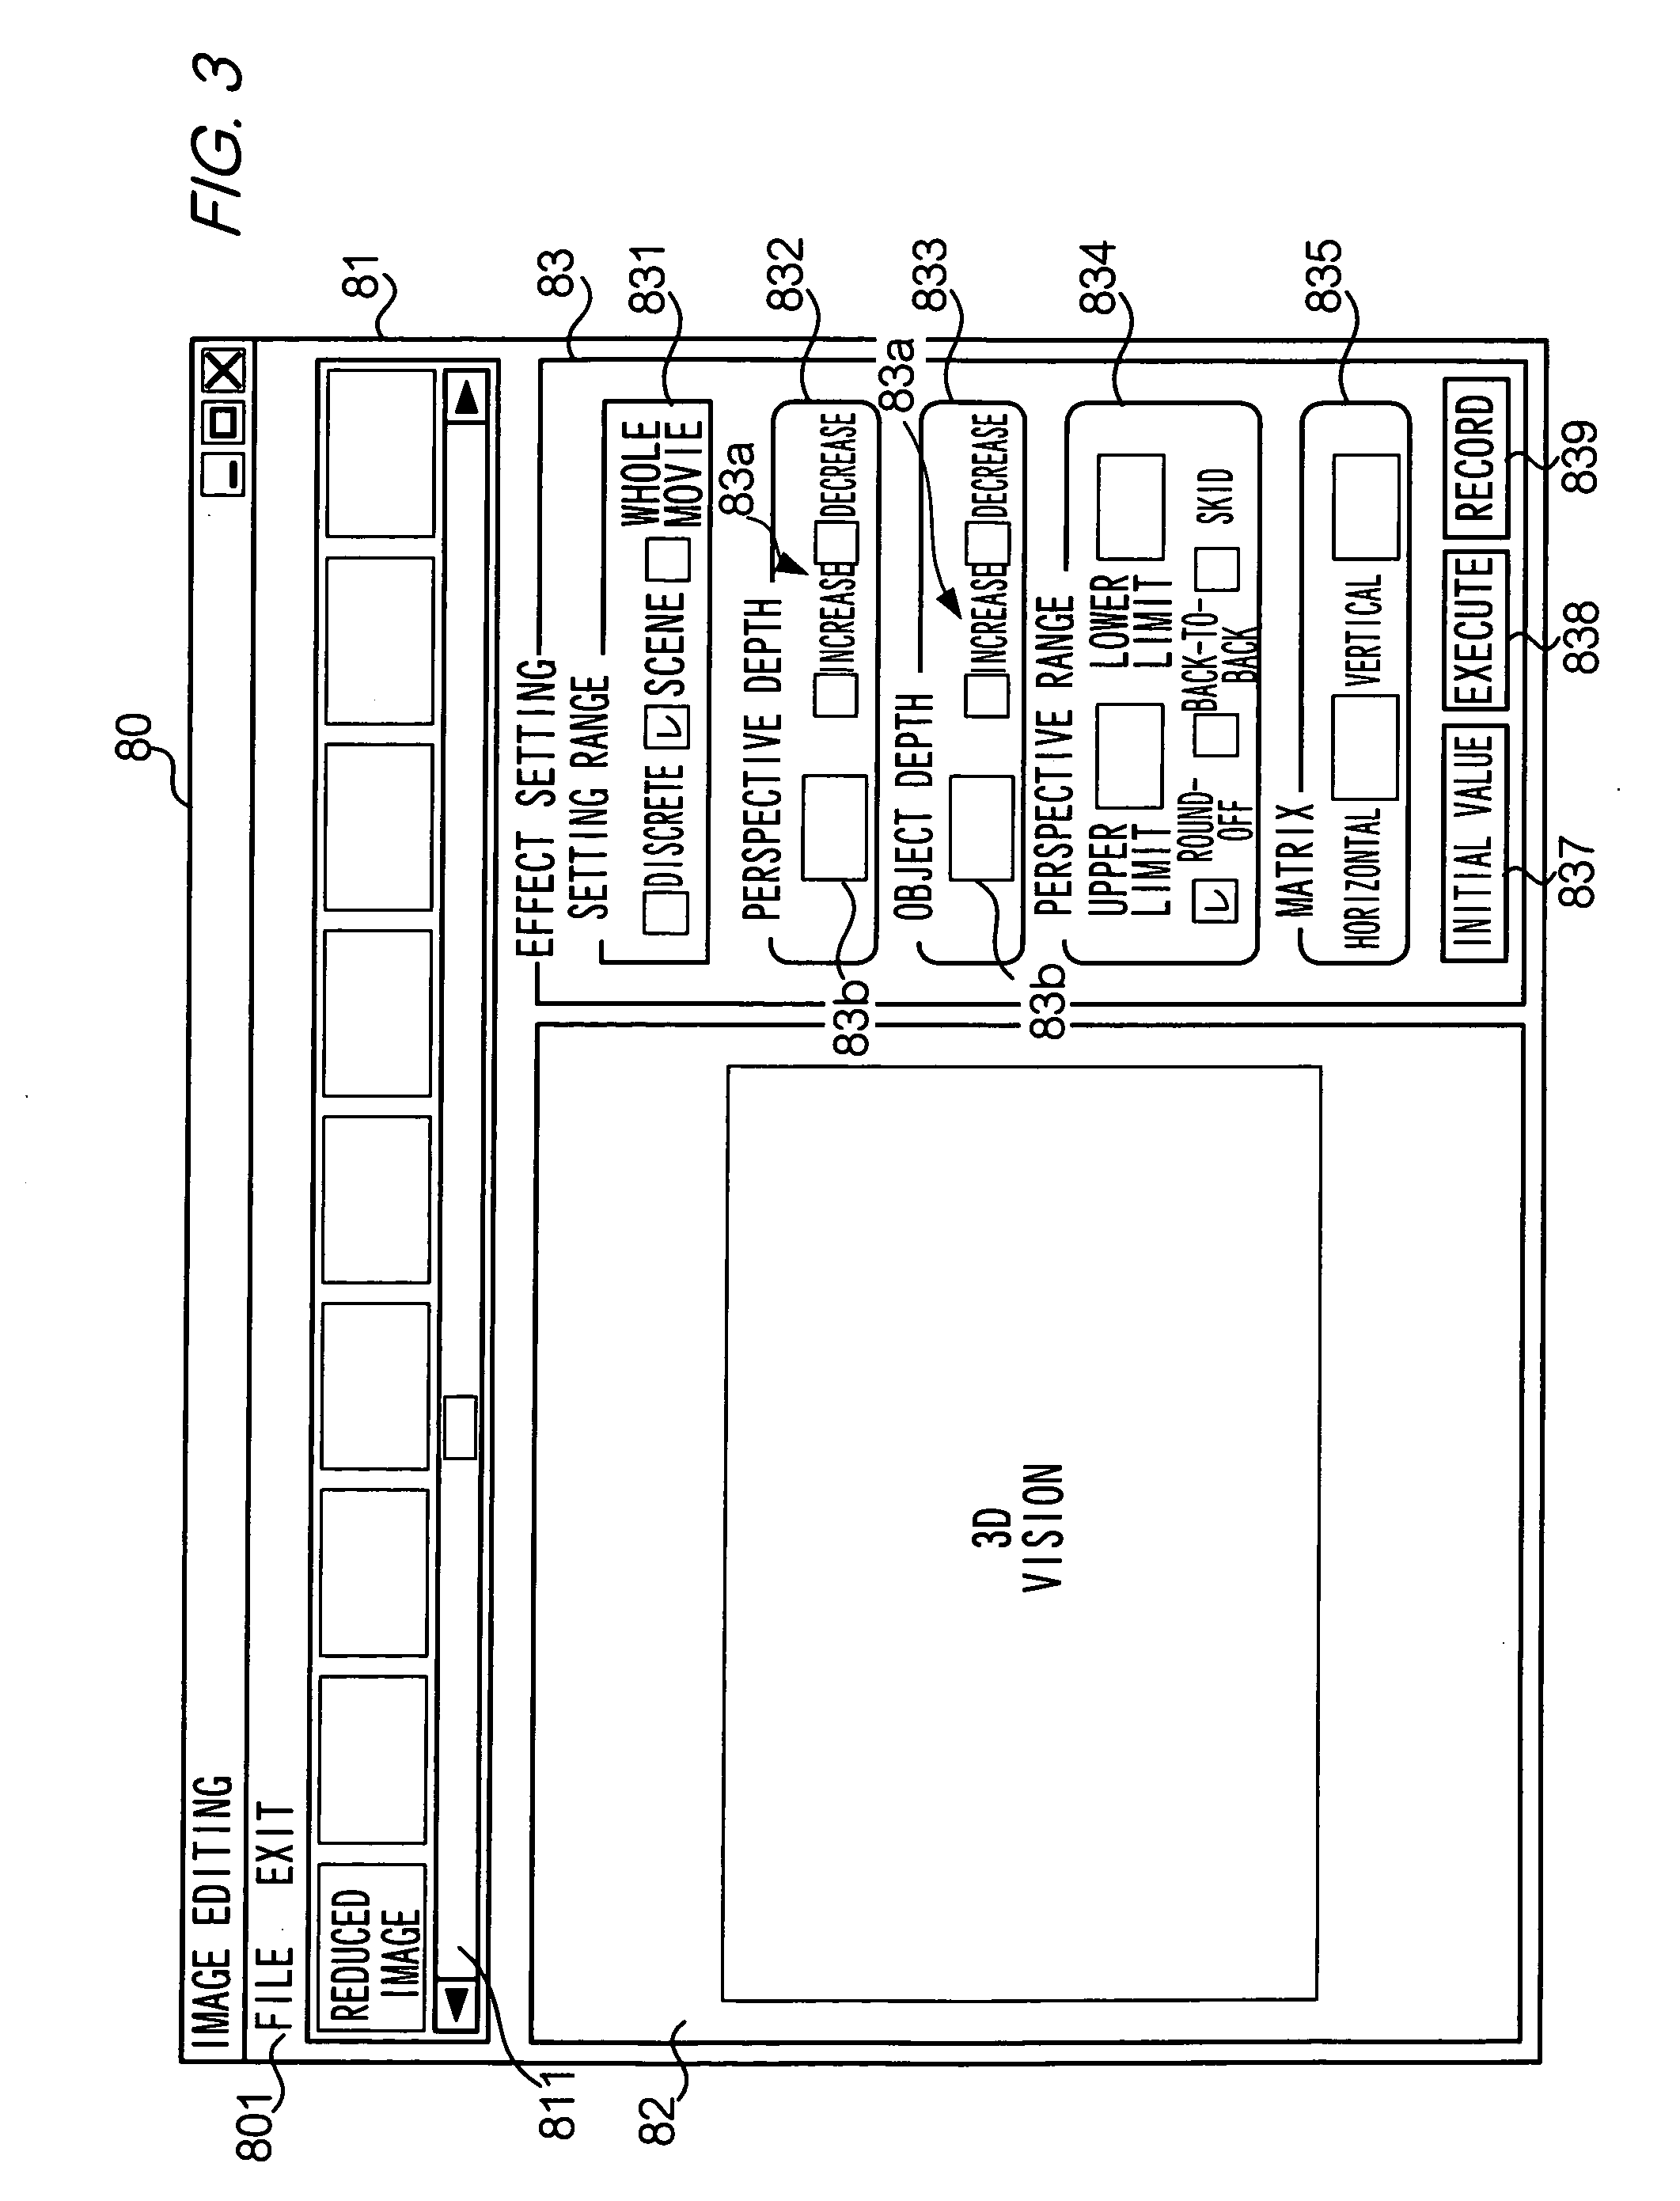 Image processing apparatus, image pickup device and program therefor